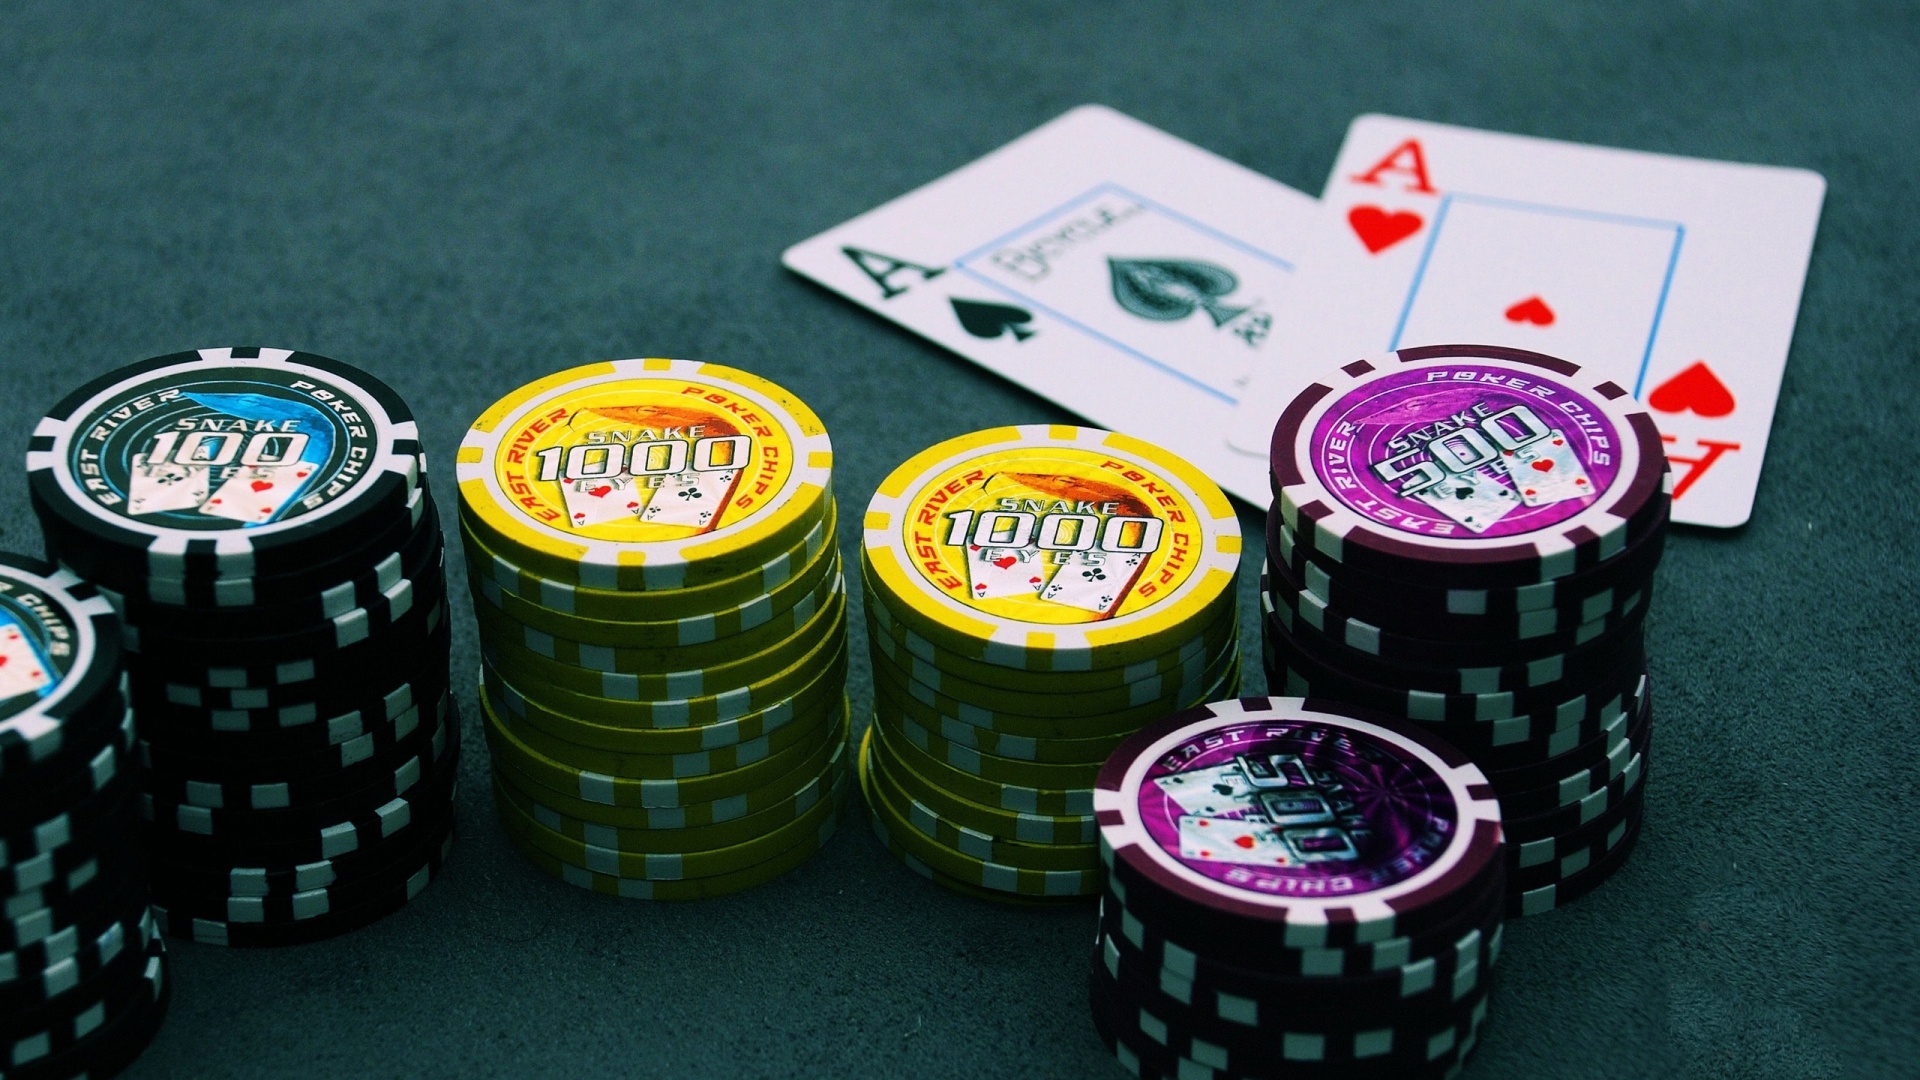 Poker: Gambling items, Mid-range plastic chips, Kits for playing. 1920x1080 Full HD Background.